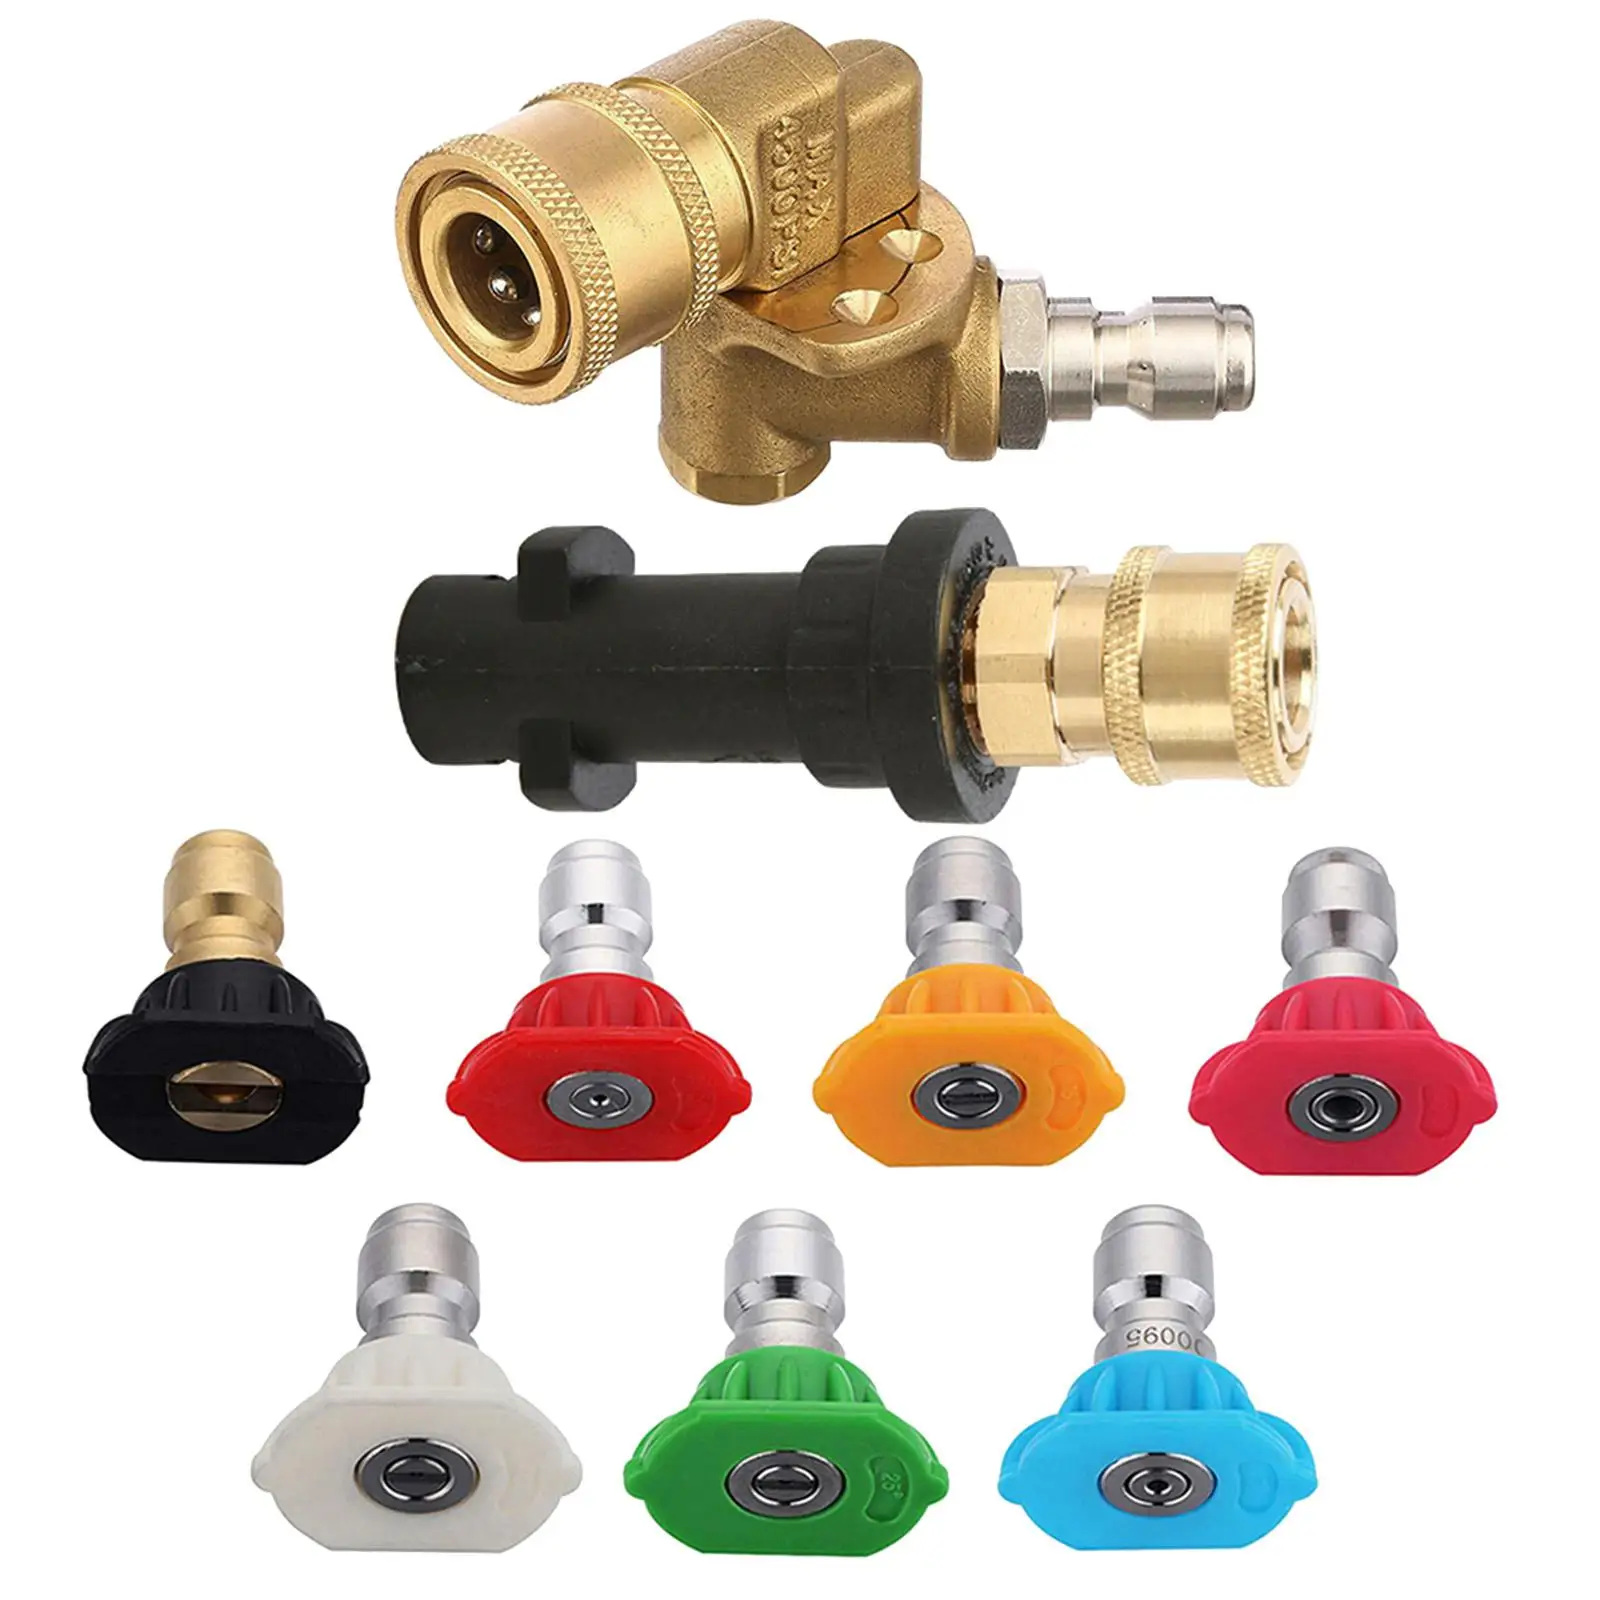 Professional Pressure Washing Adapter Kit Nozzle Tips Fittings 5 Angles Pivoting Coupler for K2 K7 K5